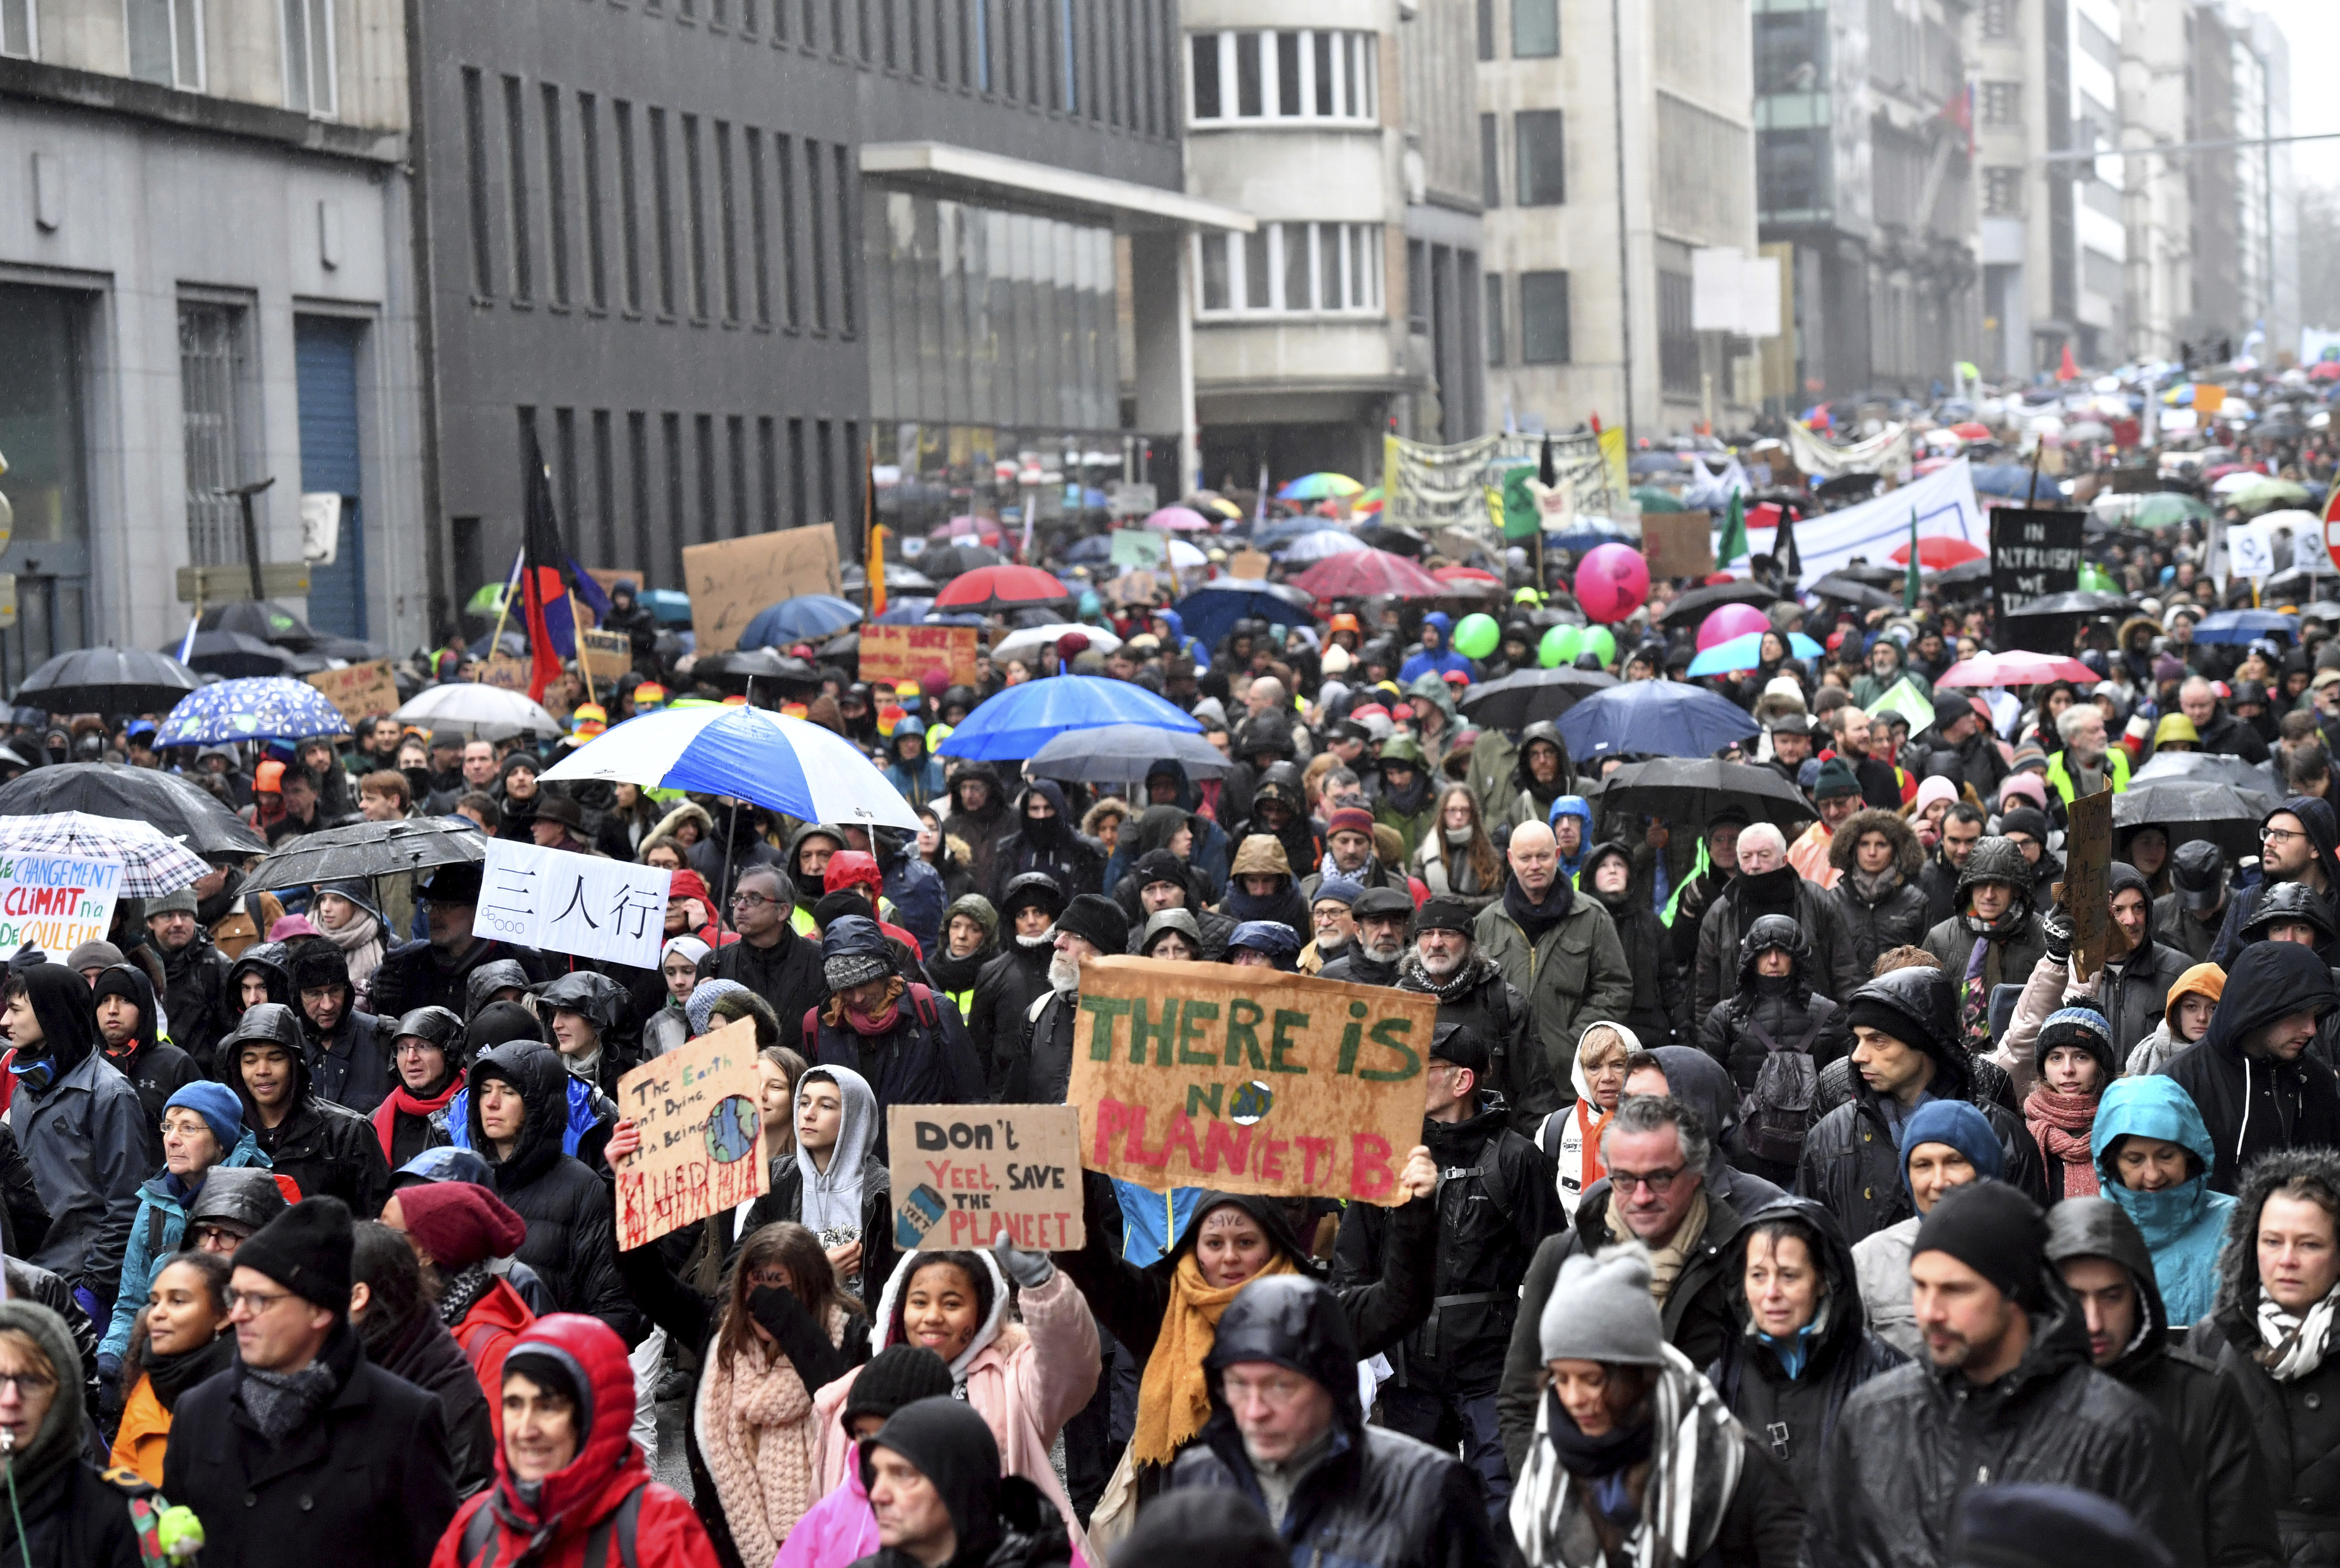 Protestors hold banners as they march during a Rise for the Climate demonstration in Brussels, Sunday, Jan. 27, 2019. (AP Photo/Geert Vanden Wijngaert)